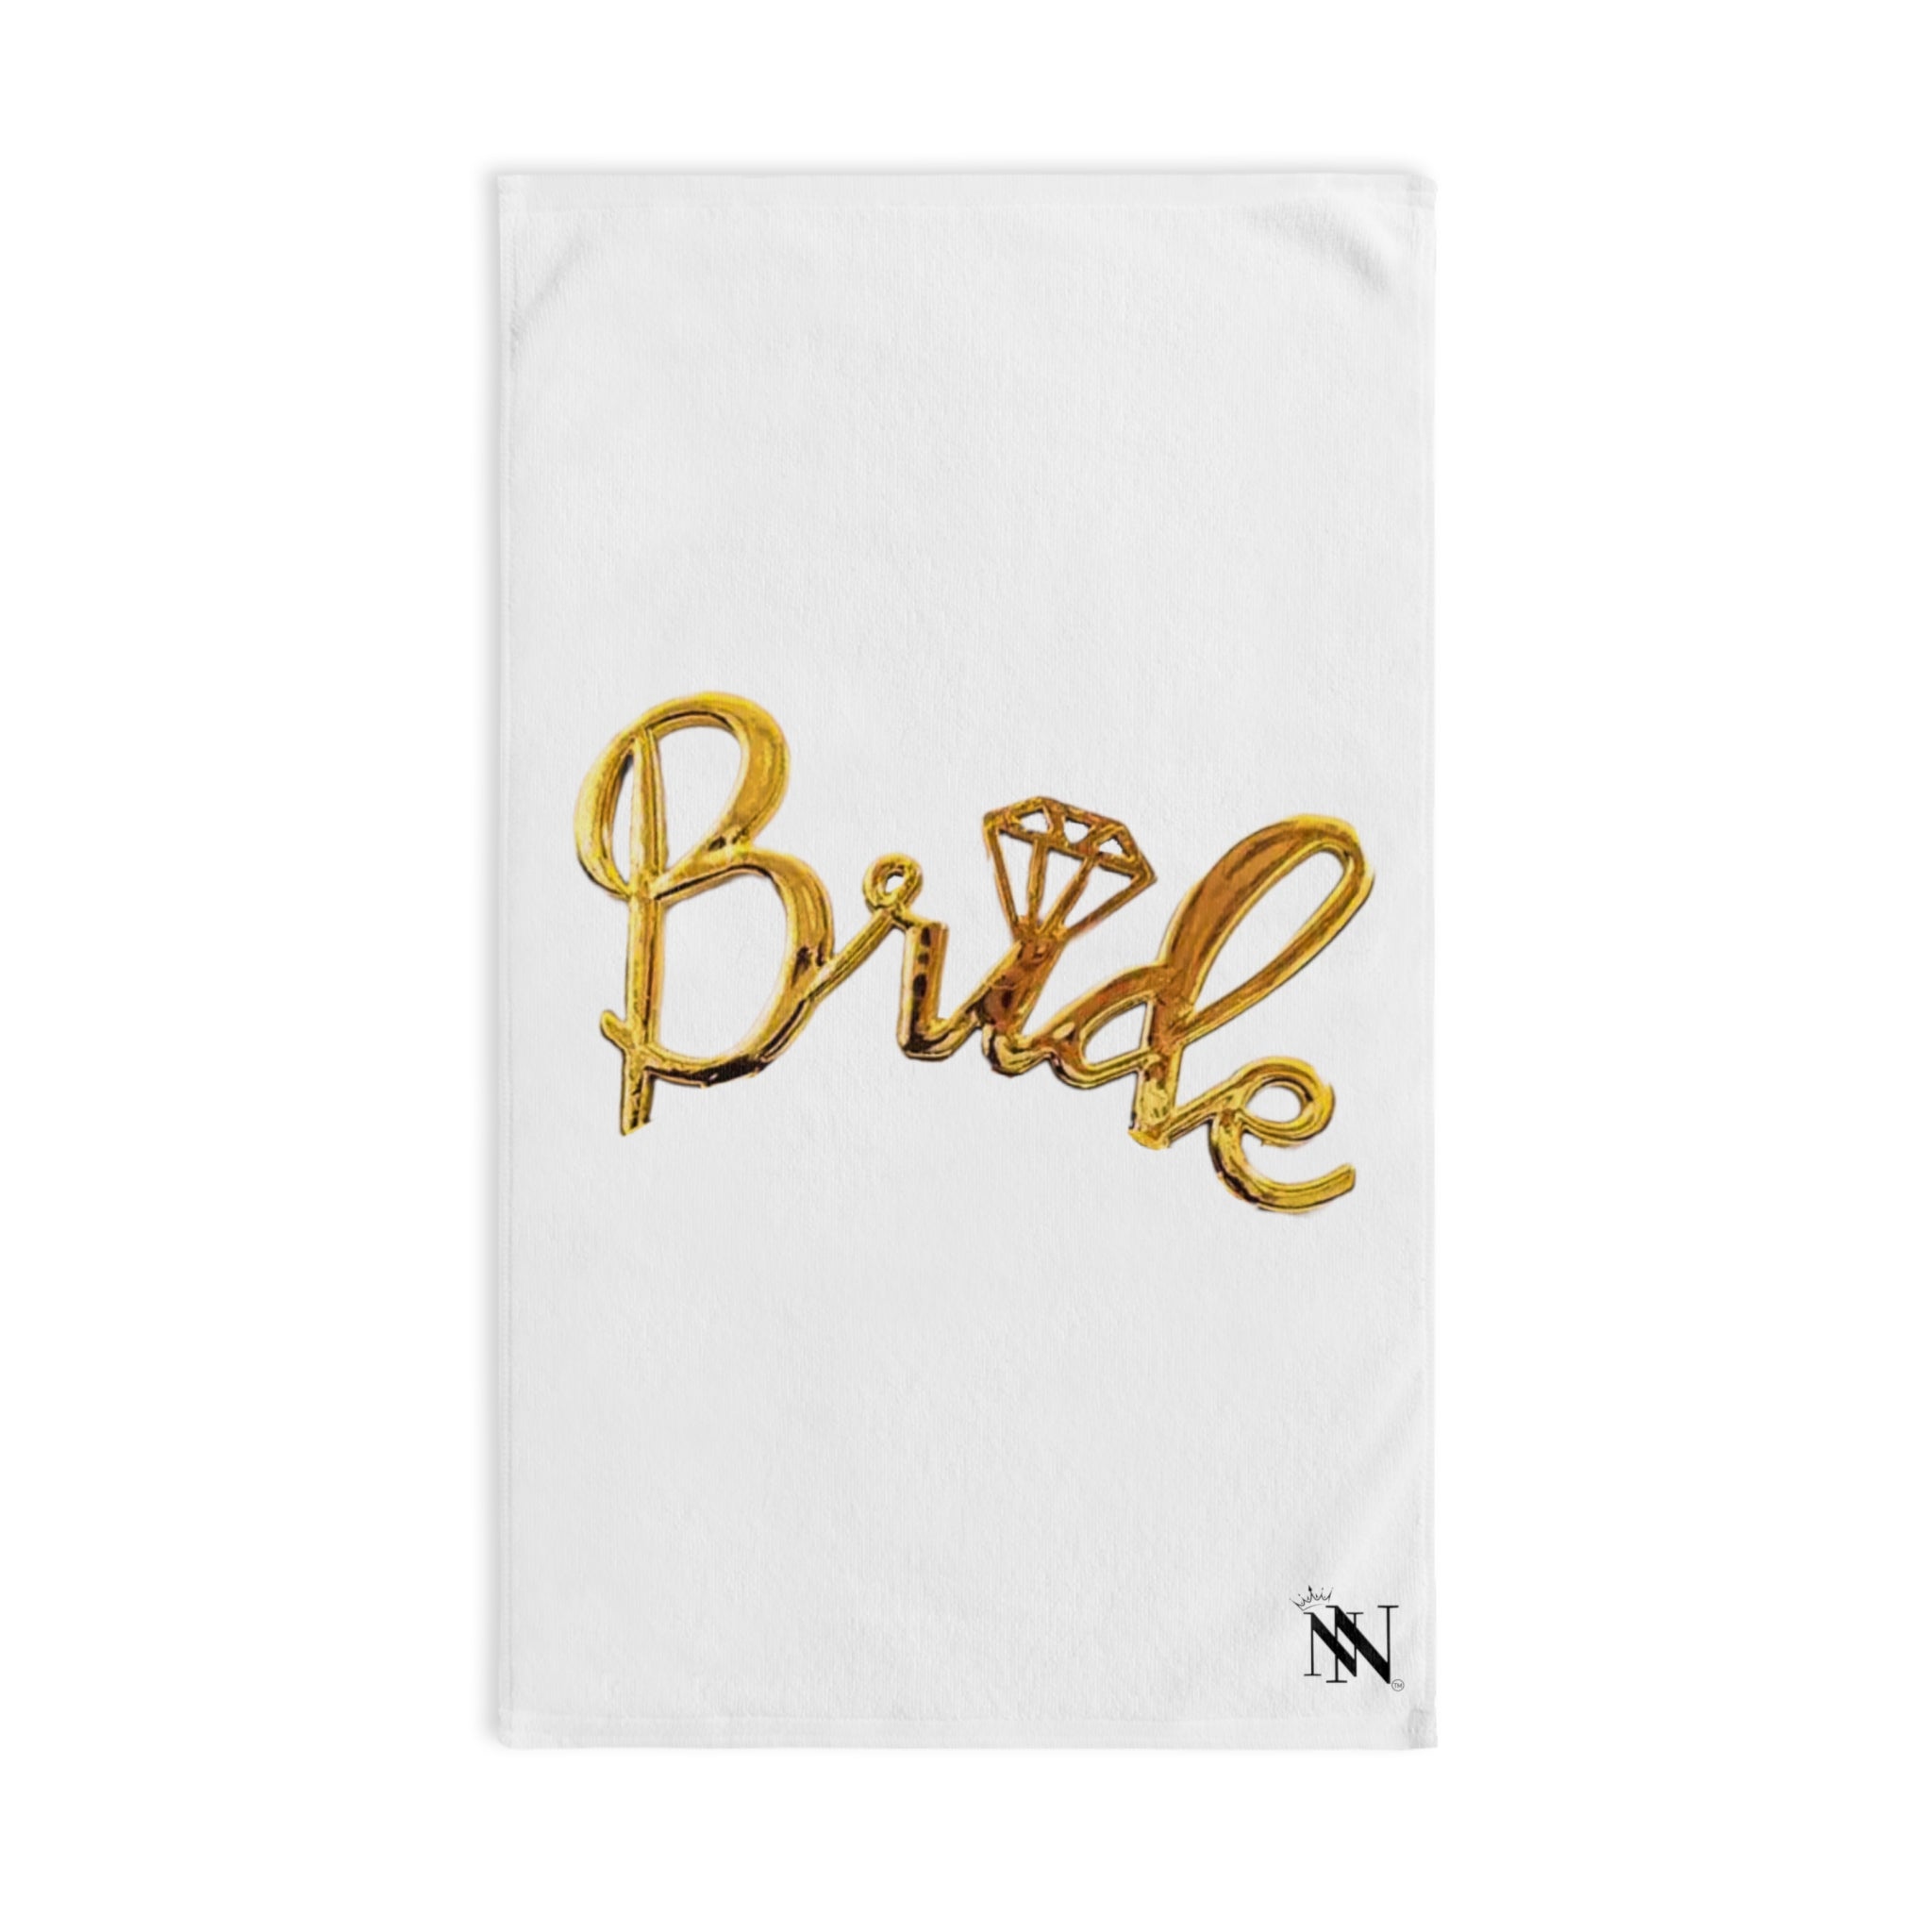 Gold Bride BlingWhite | Funny Gifts for Men - Gifts for Him - Birthday Gifts for Men, Him, Her, Husband, Boyfriend, Girlfriend, New Couple Gifts, Fathers & Valentines Day Gifts, Christmas Gifts NECTAR NAPKINS